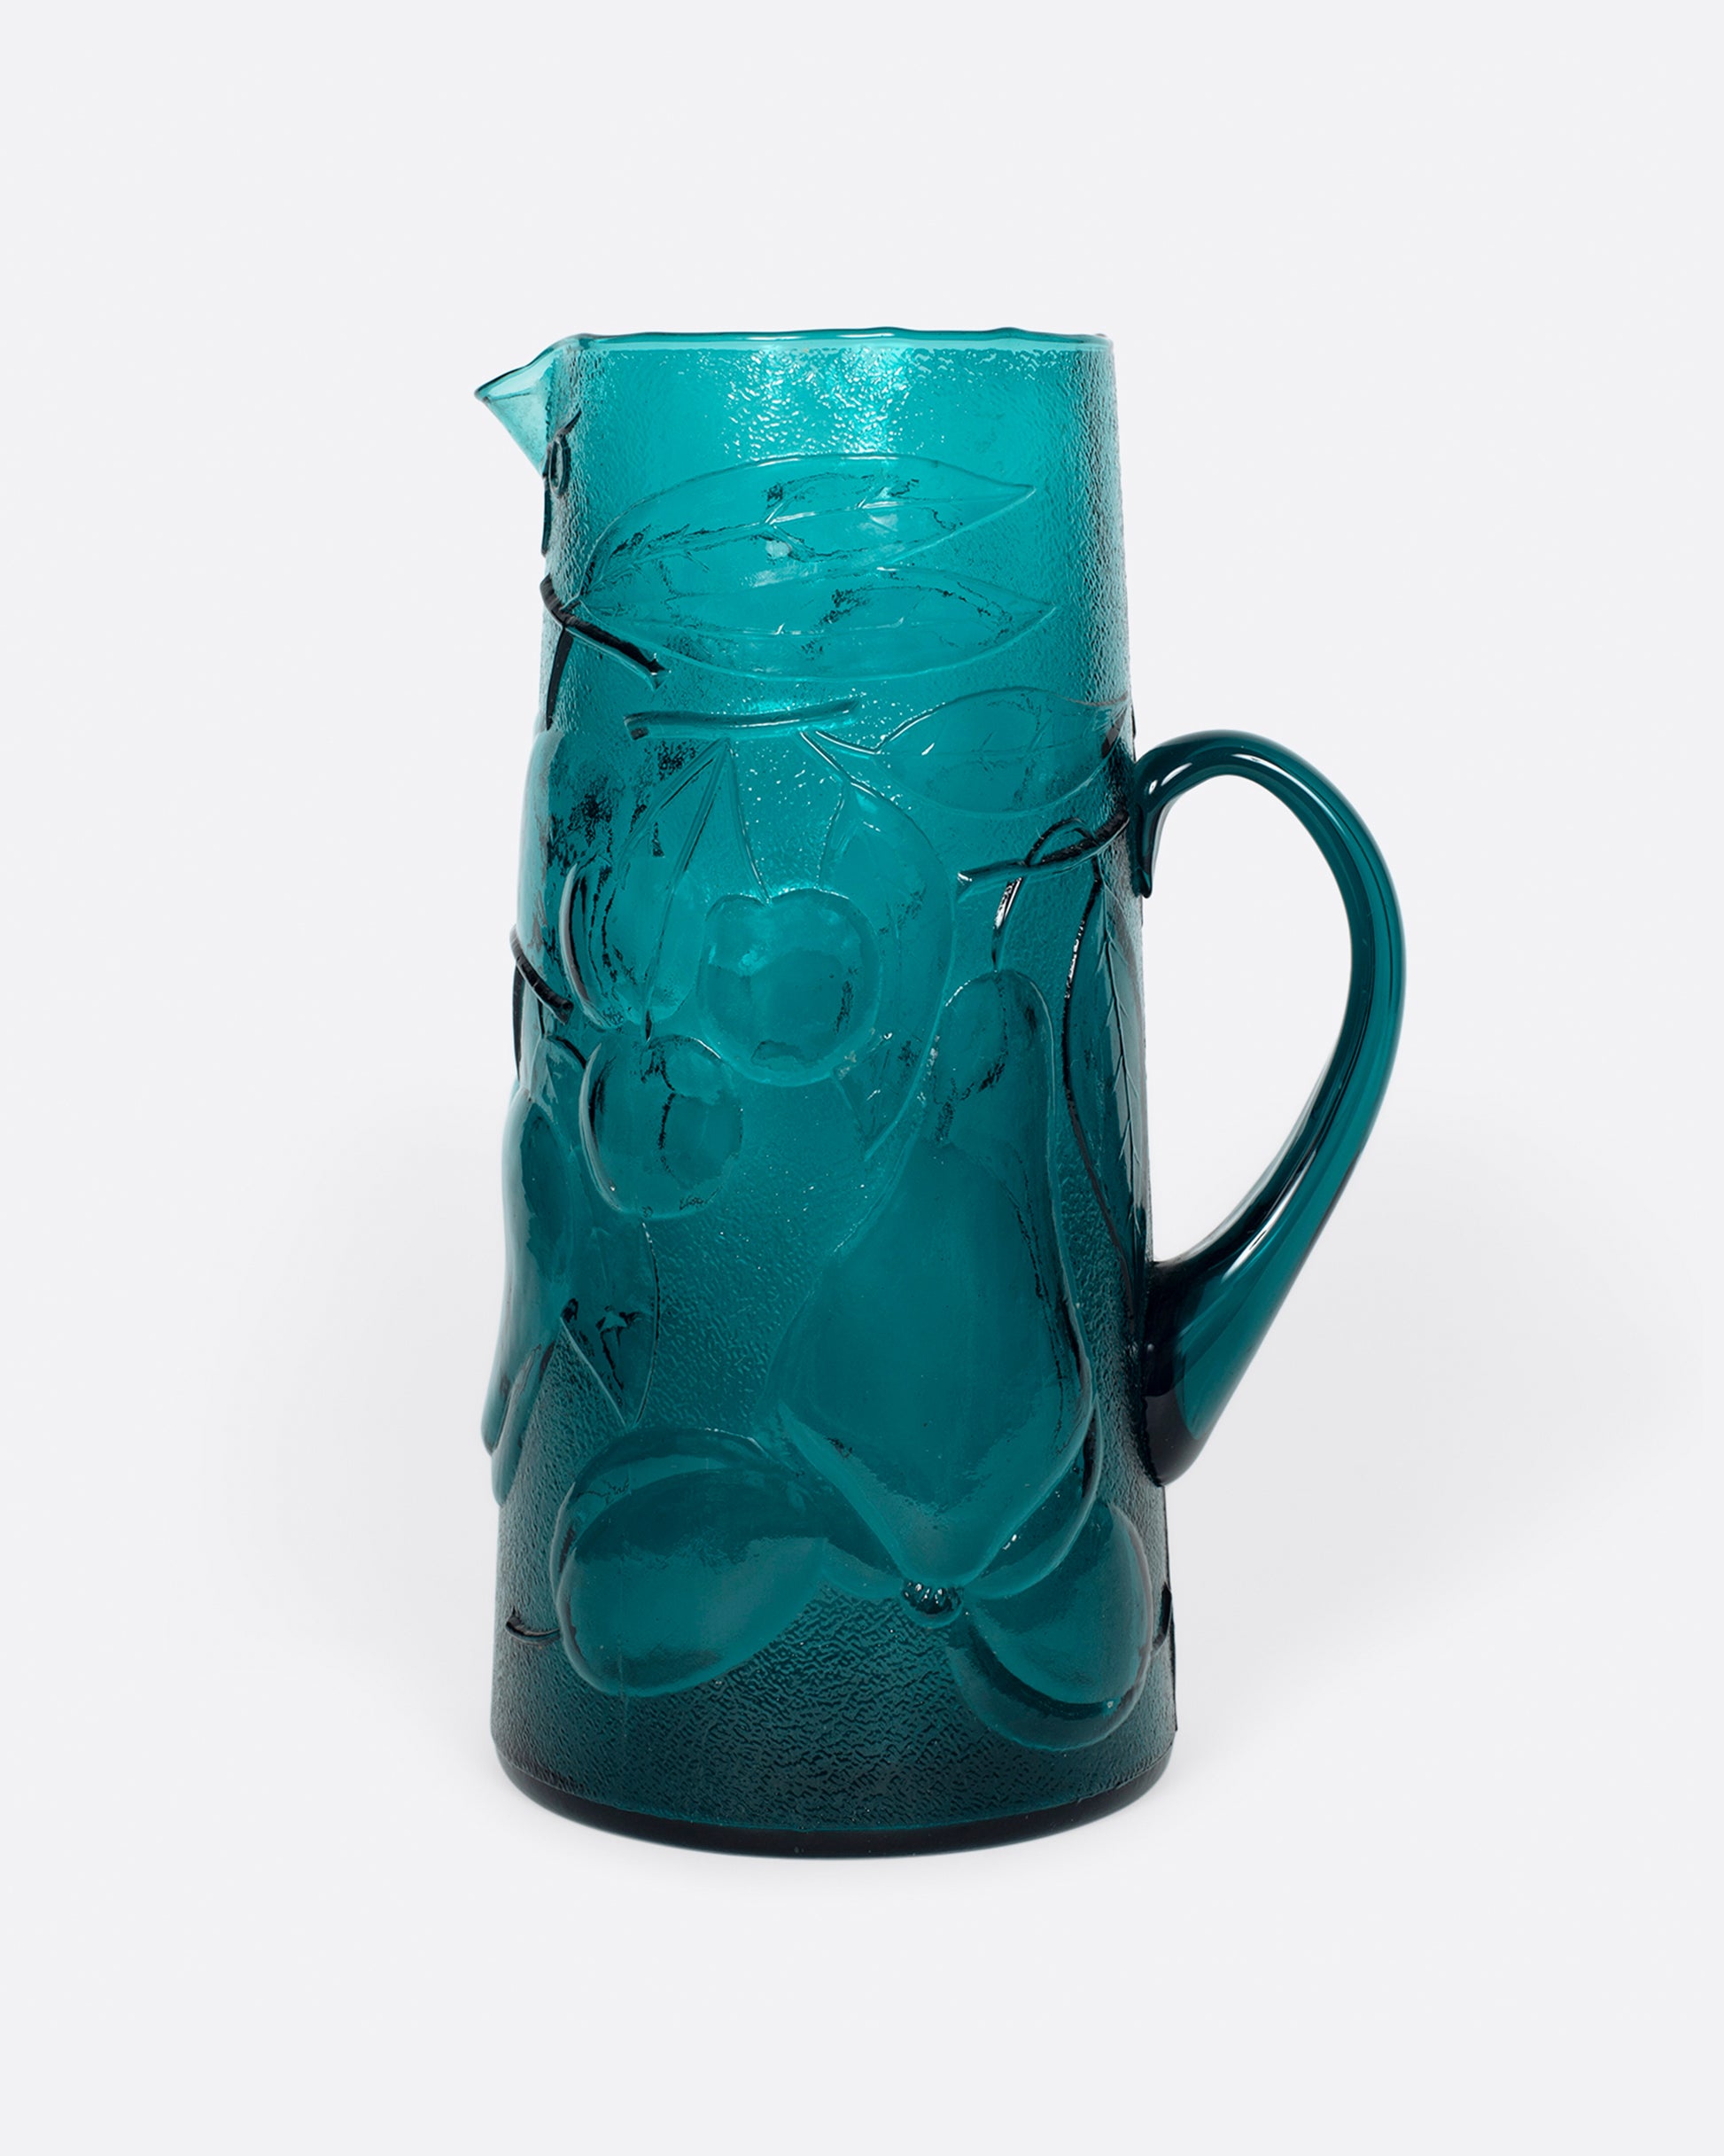 This teal glass set has a subtle fruity texture.